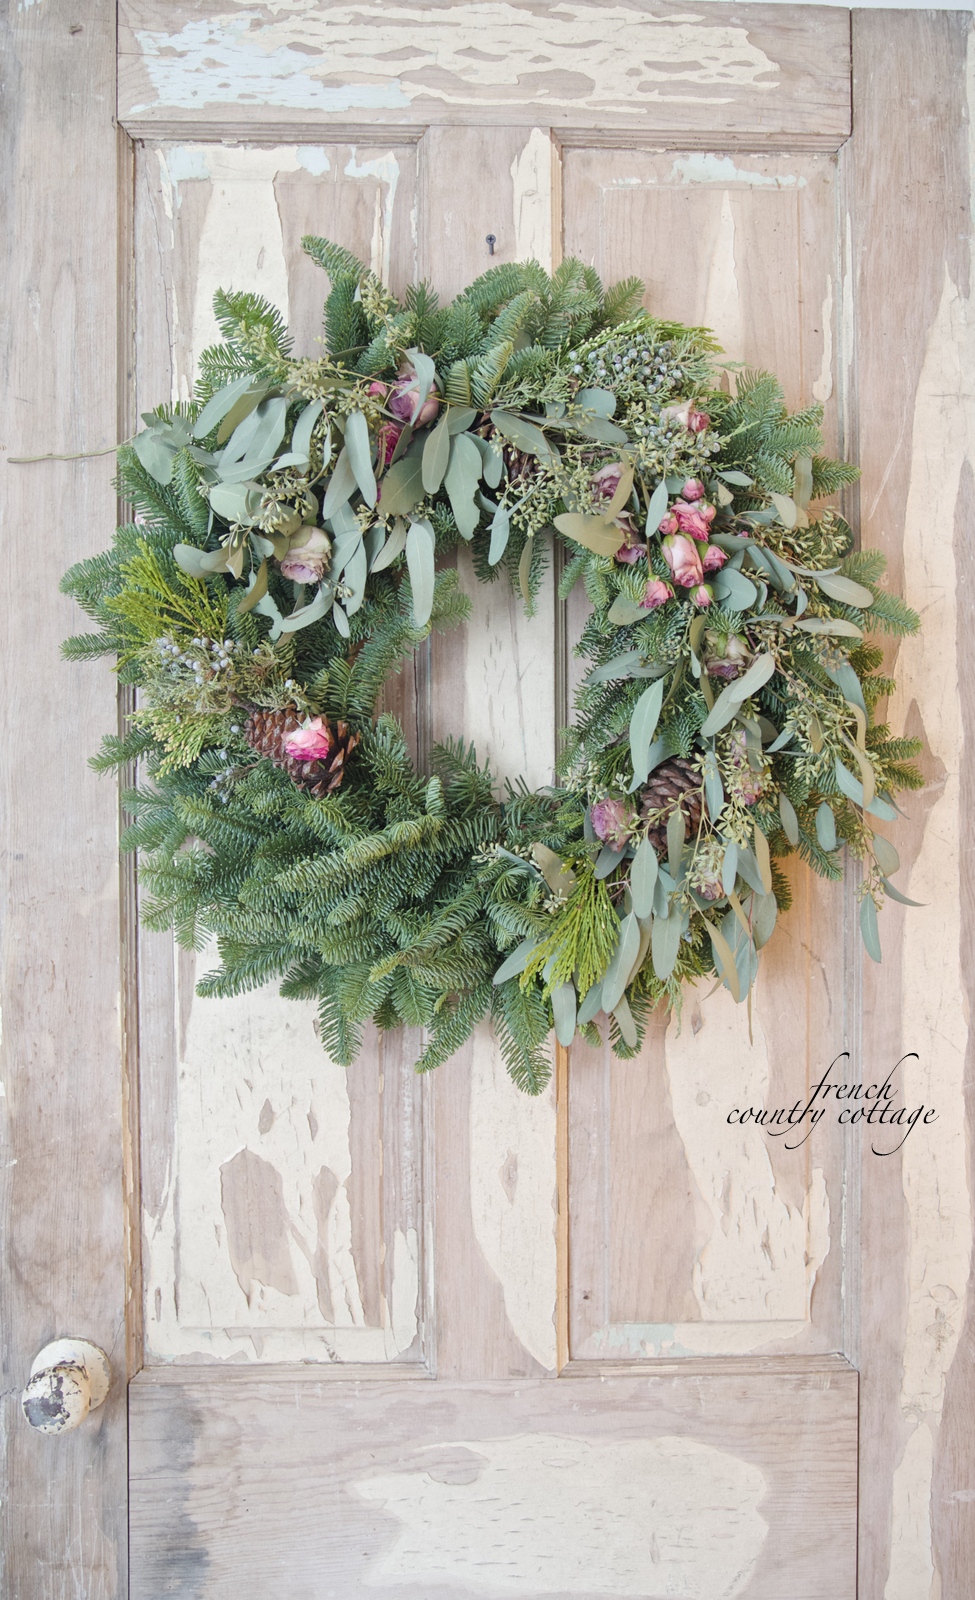 Easy 5 minute Christmas wreath FRENCH COUNTRY COTTAGE